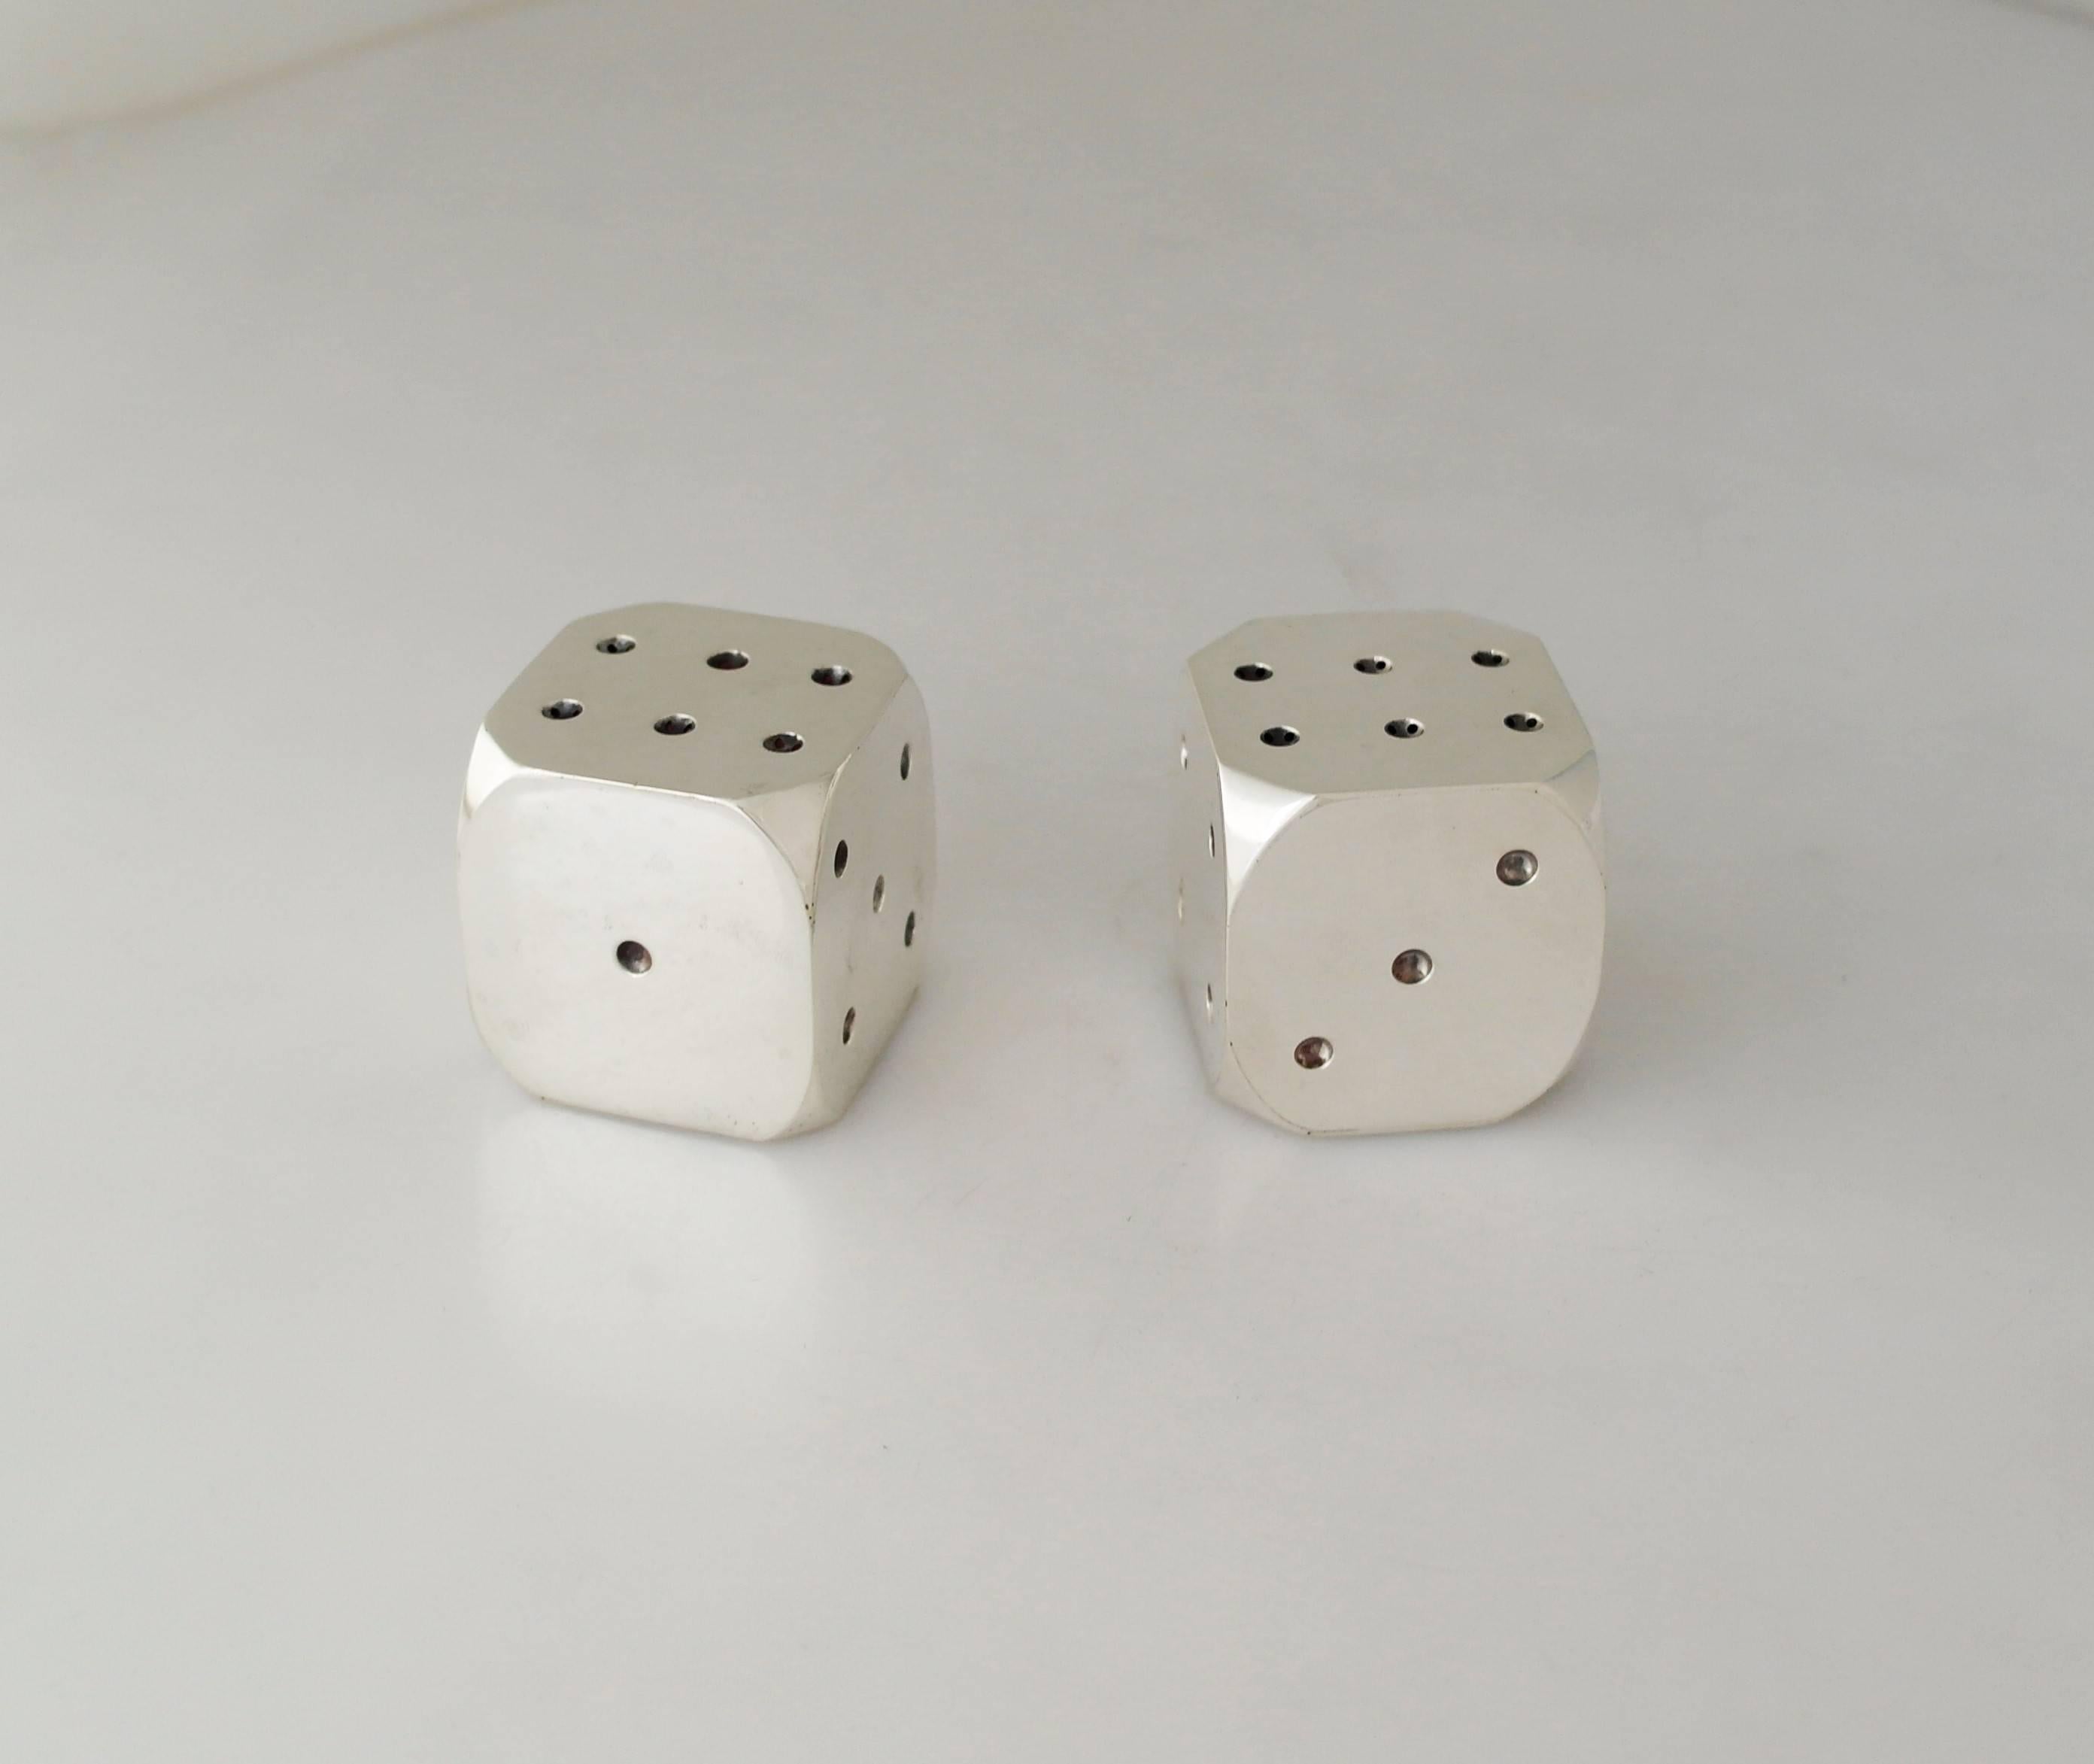 Being offered are a pair of exceedingly rare circa 1967 .930 silver (better than sterling) salt and pepper shakers by Antonio Pineda of Taxco, Mexico. Incredible pair of shakers, of heavy gauge silver, in the form of dice. Dimensions: 1 7/8